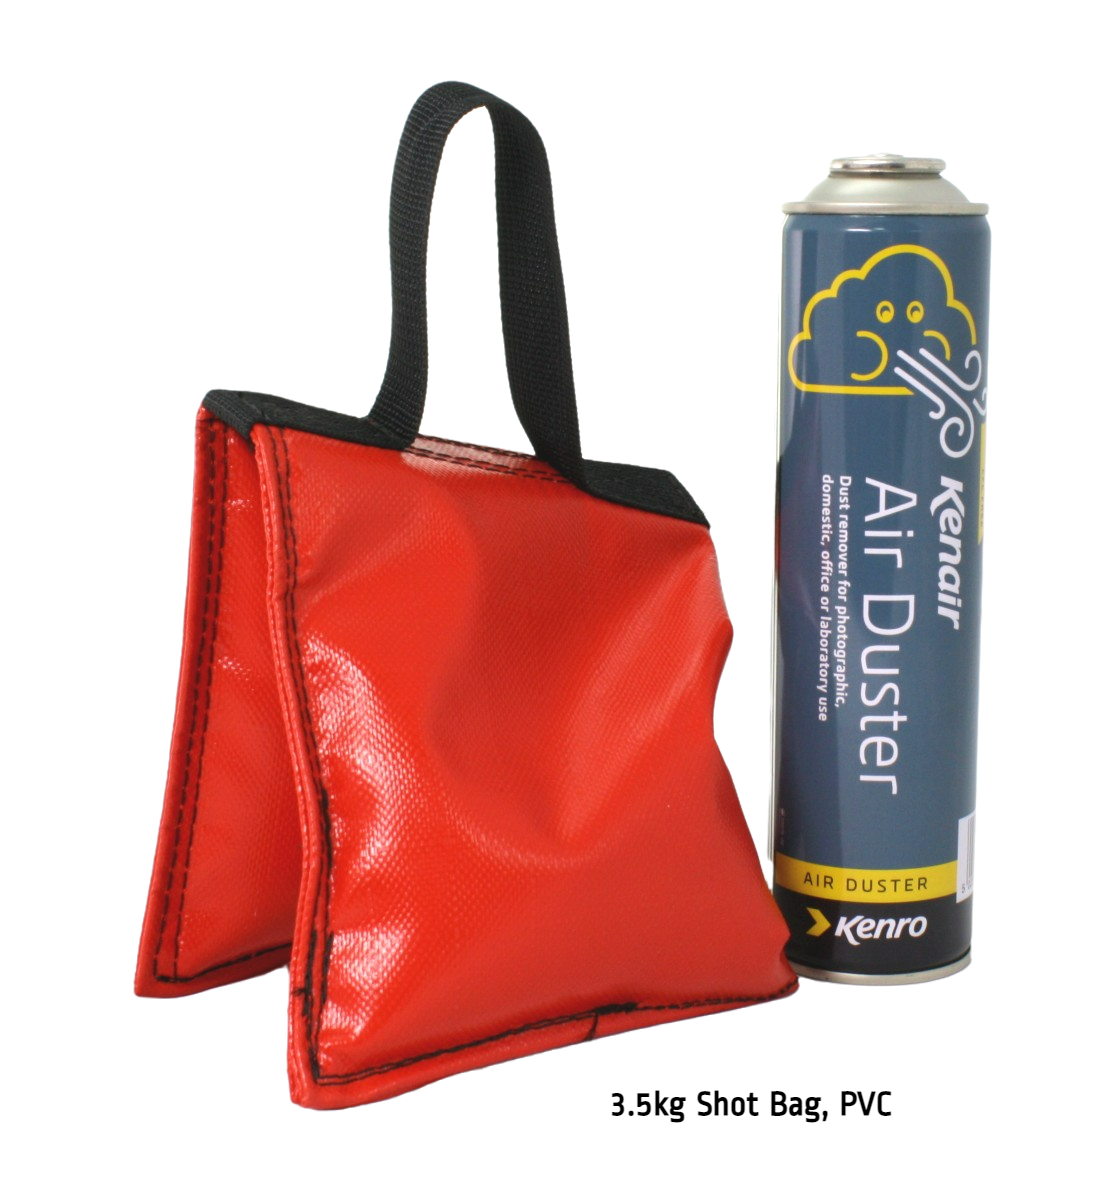 3.5kg Shot Bag, Red PVC, with a Kenair can for scale comparison